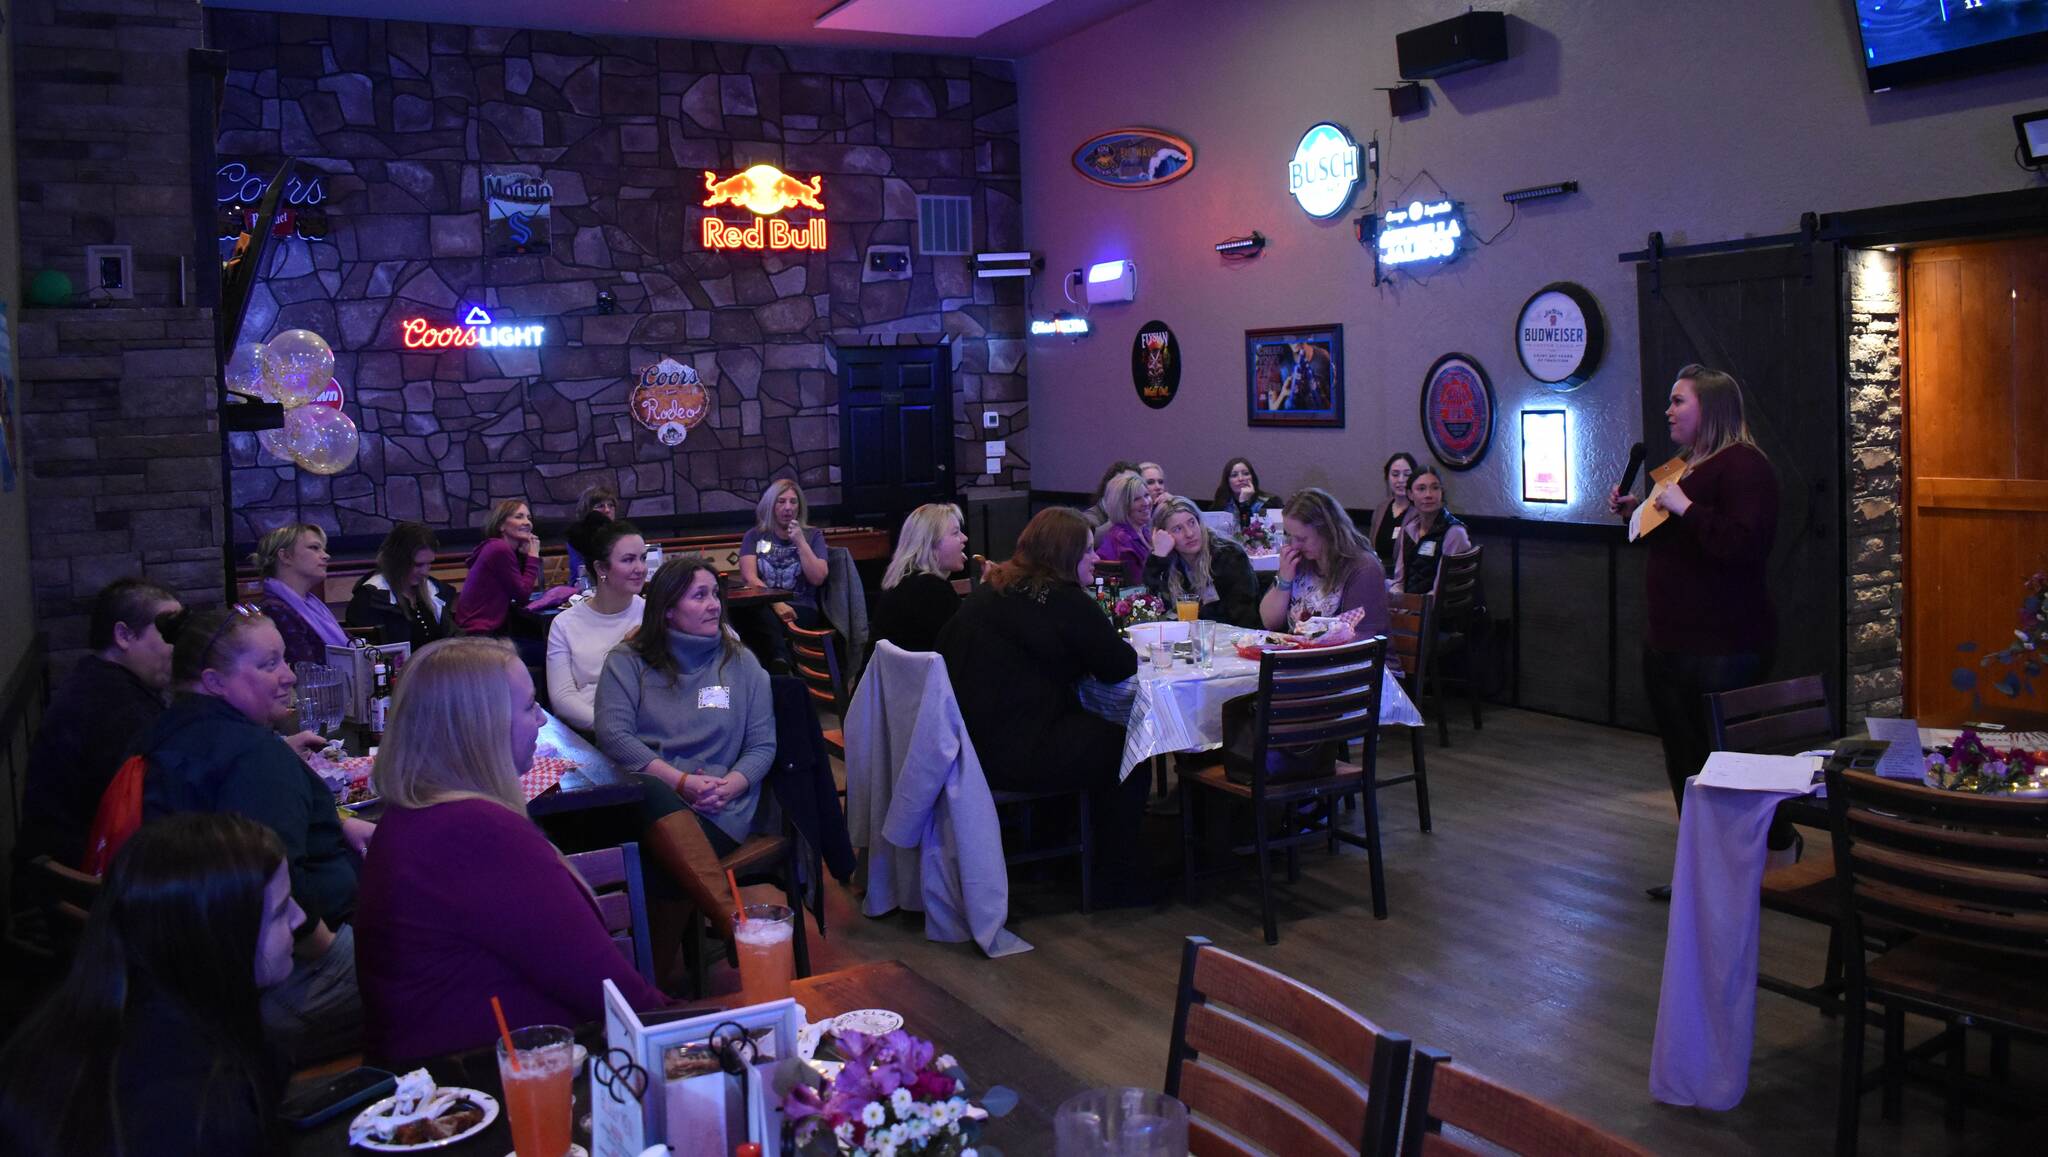 Allen Leister / The Daily World
More than 30 women gathered for Women & Wings to celebrate and reflect women’s empowerment as well as enjoy deep-fried chicken wings during International Women’s Day at Shujacks Bar & Grill, in Elma.